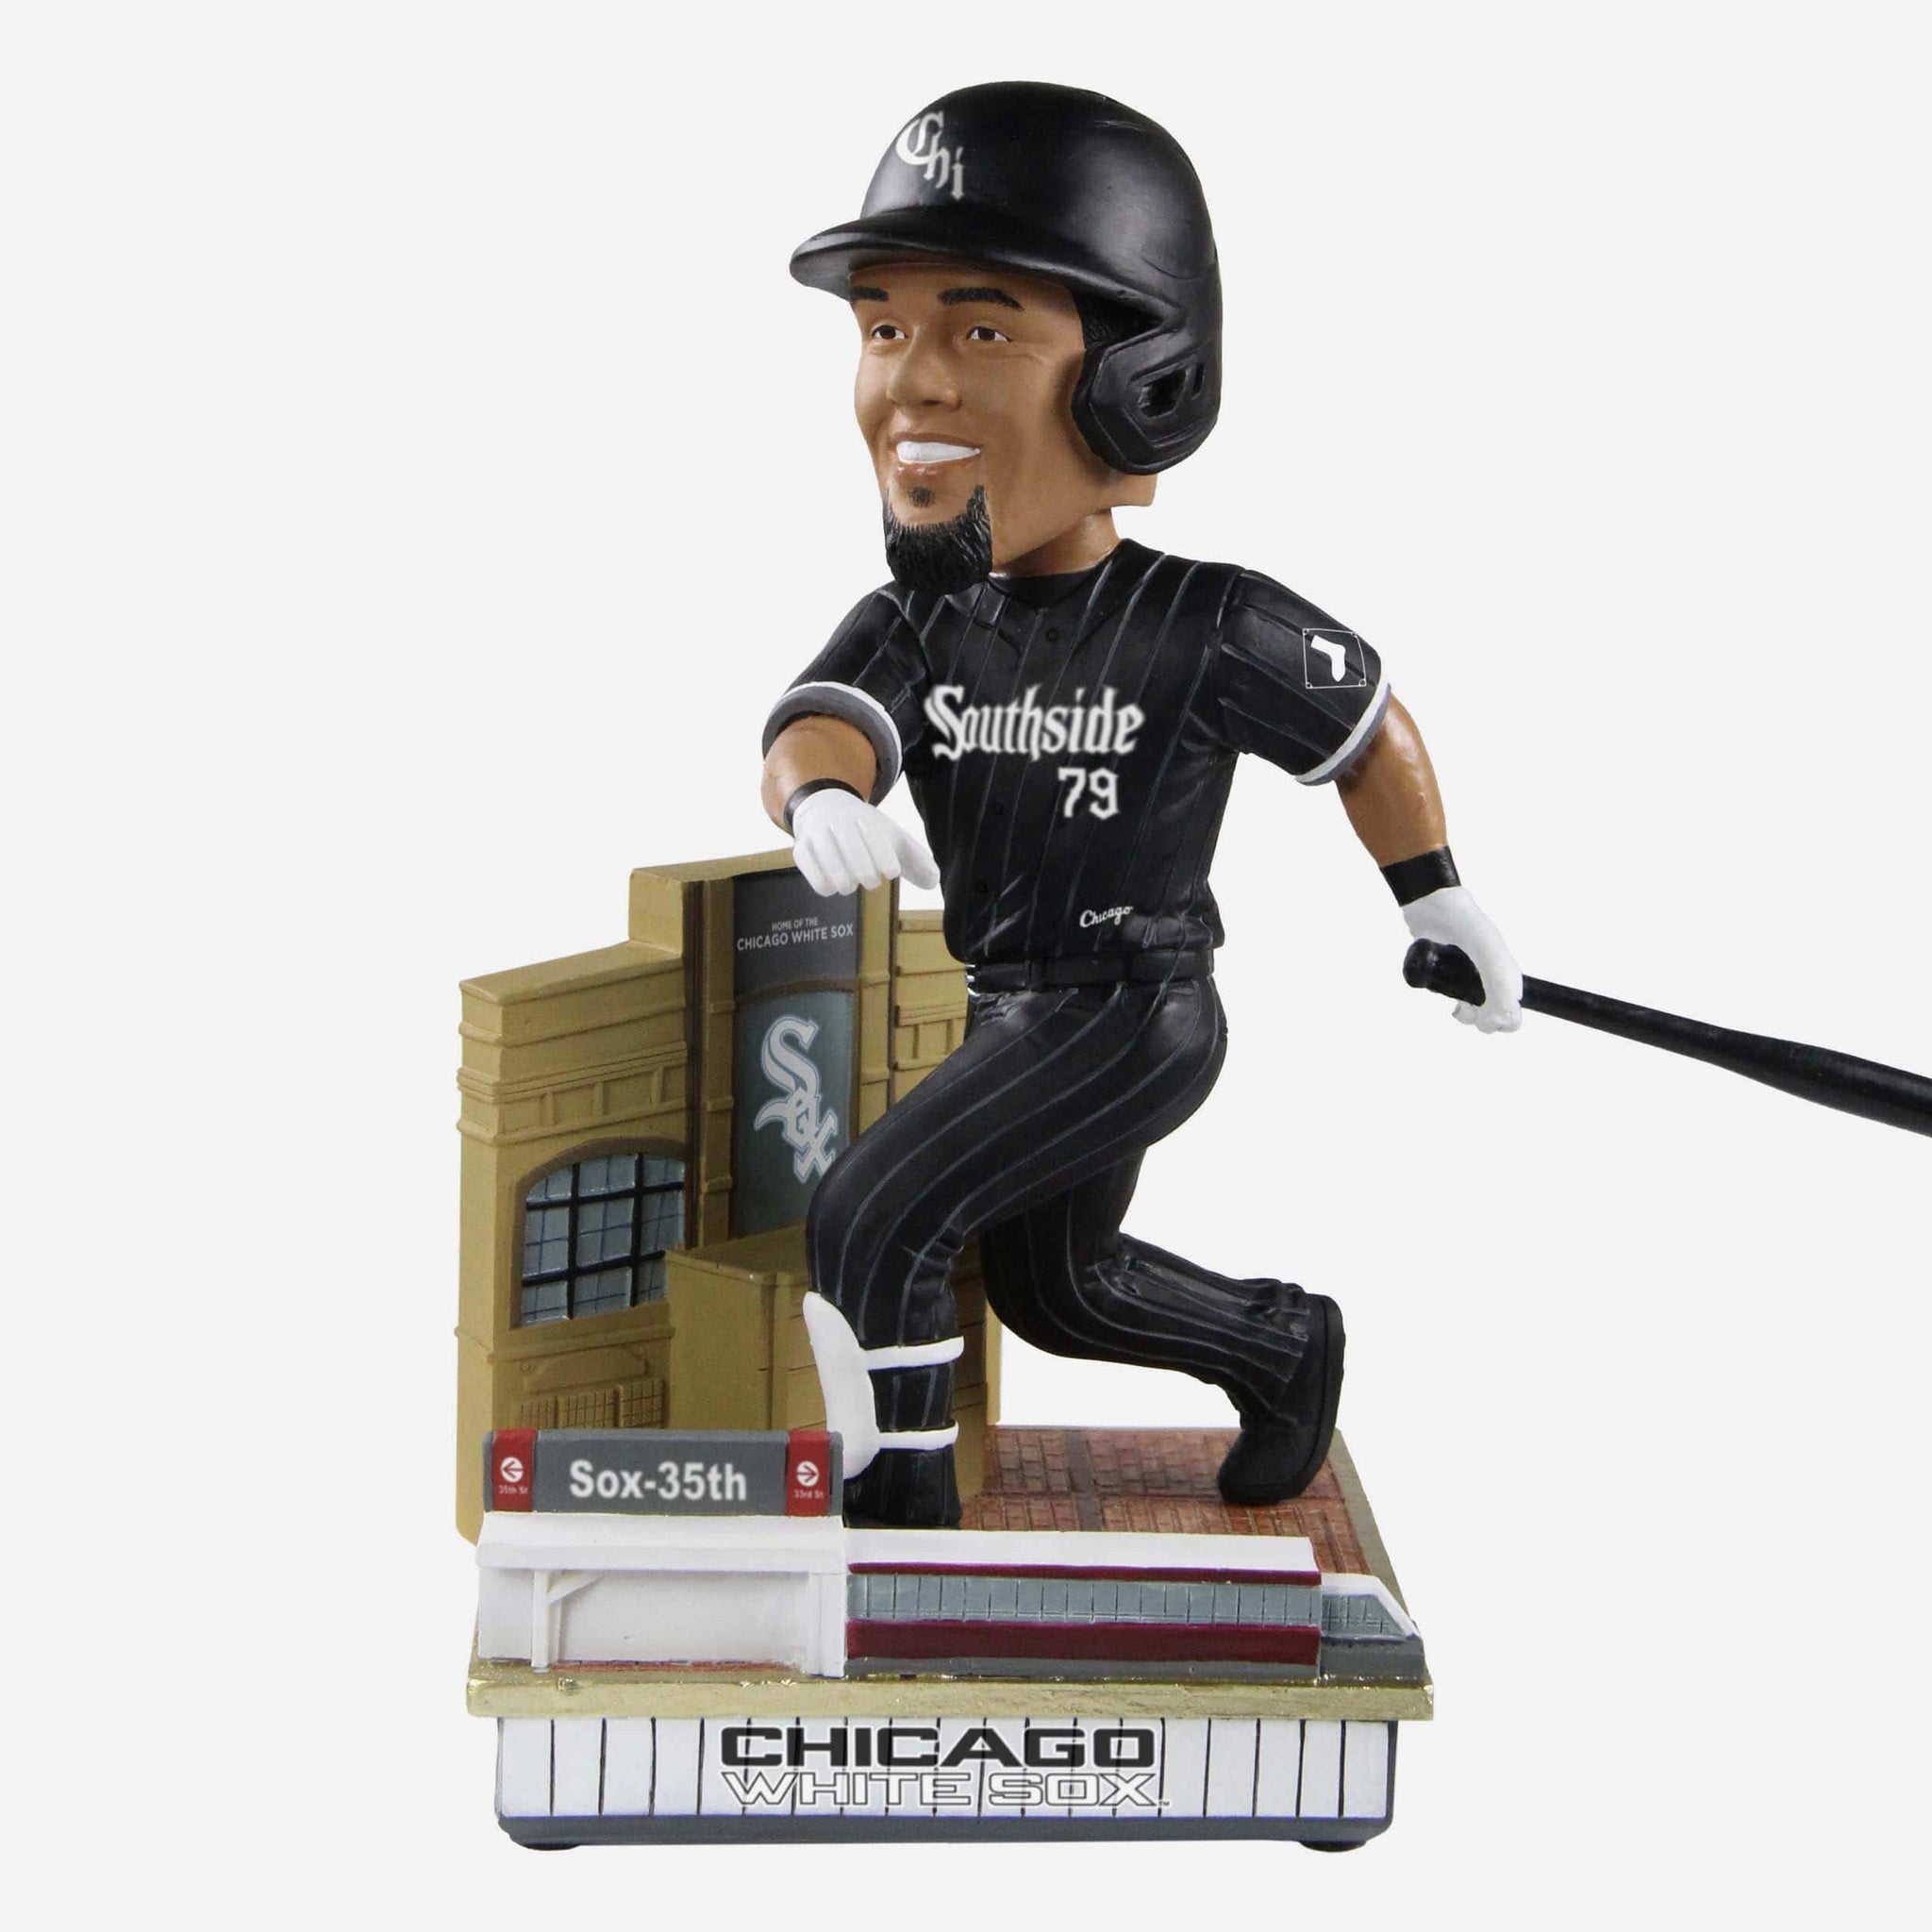 White Sox release promotional schedule of bobbleheads